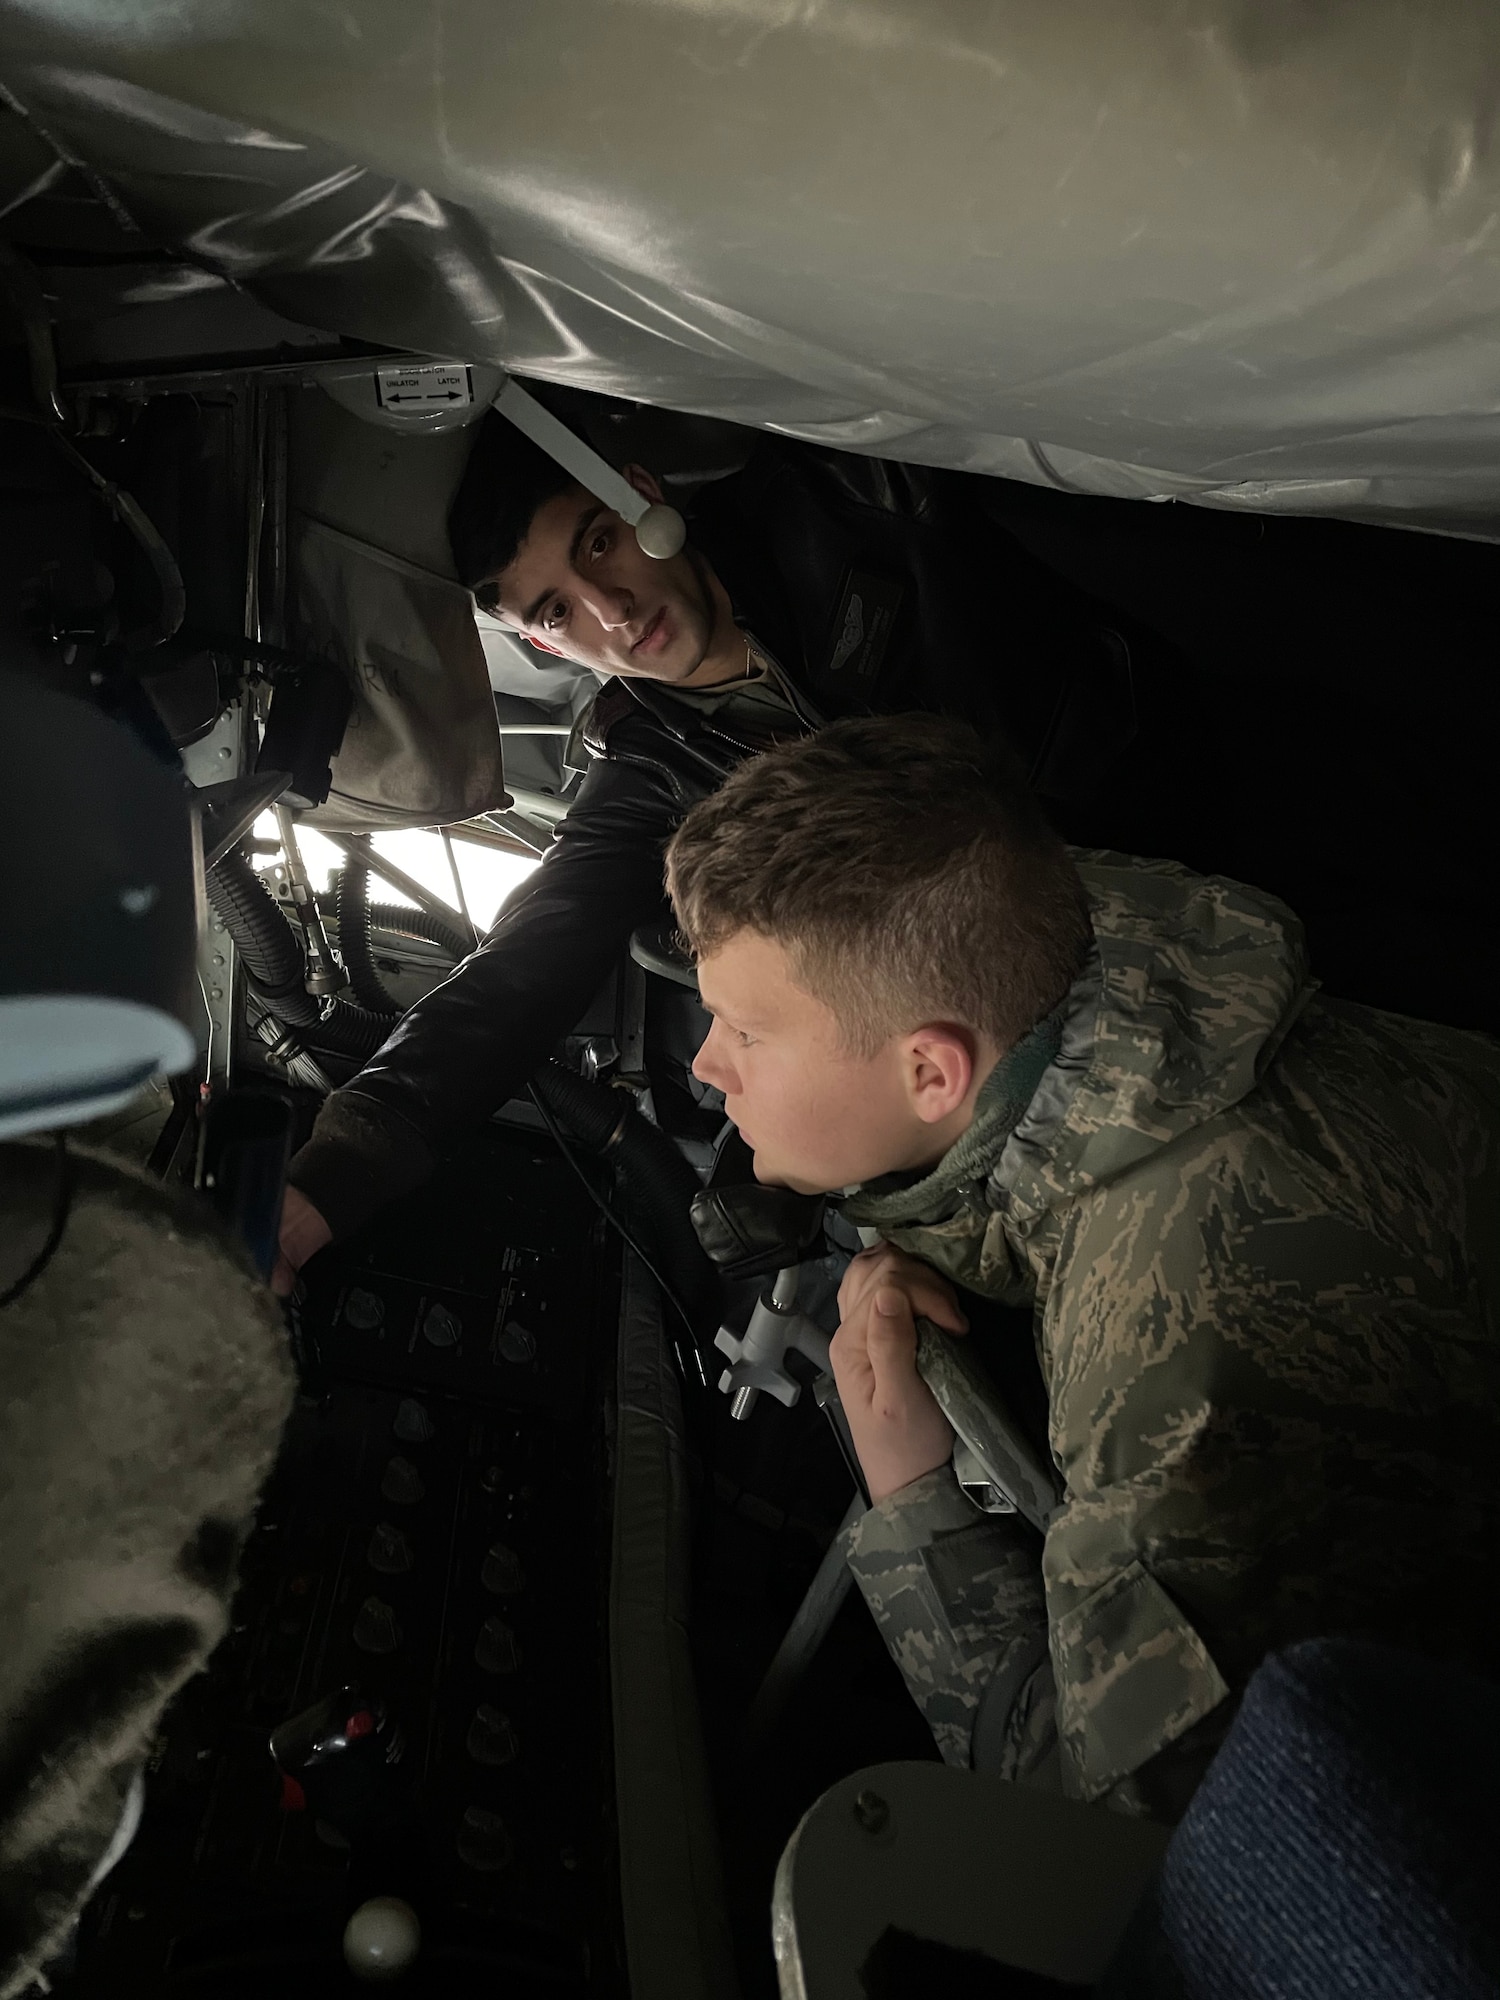 U.S. Air Force Staff Sgt. Brayan Ramirez, top, 351st Air Refueling Squadron boom operator, teaches a Mildenhall Squadron cadet about the boom pod of a KC-135 Stratotanker aircraft at Royal Air Force Mildenhall, England, Dec. 8, 2021. The cadets are part of the Civil Air Patrol cadet program and visited the base to tour a KC-135 static display. (U.S. Air Force photo by Senior Airman Joseph Barron)